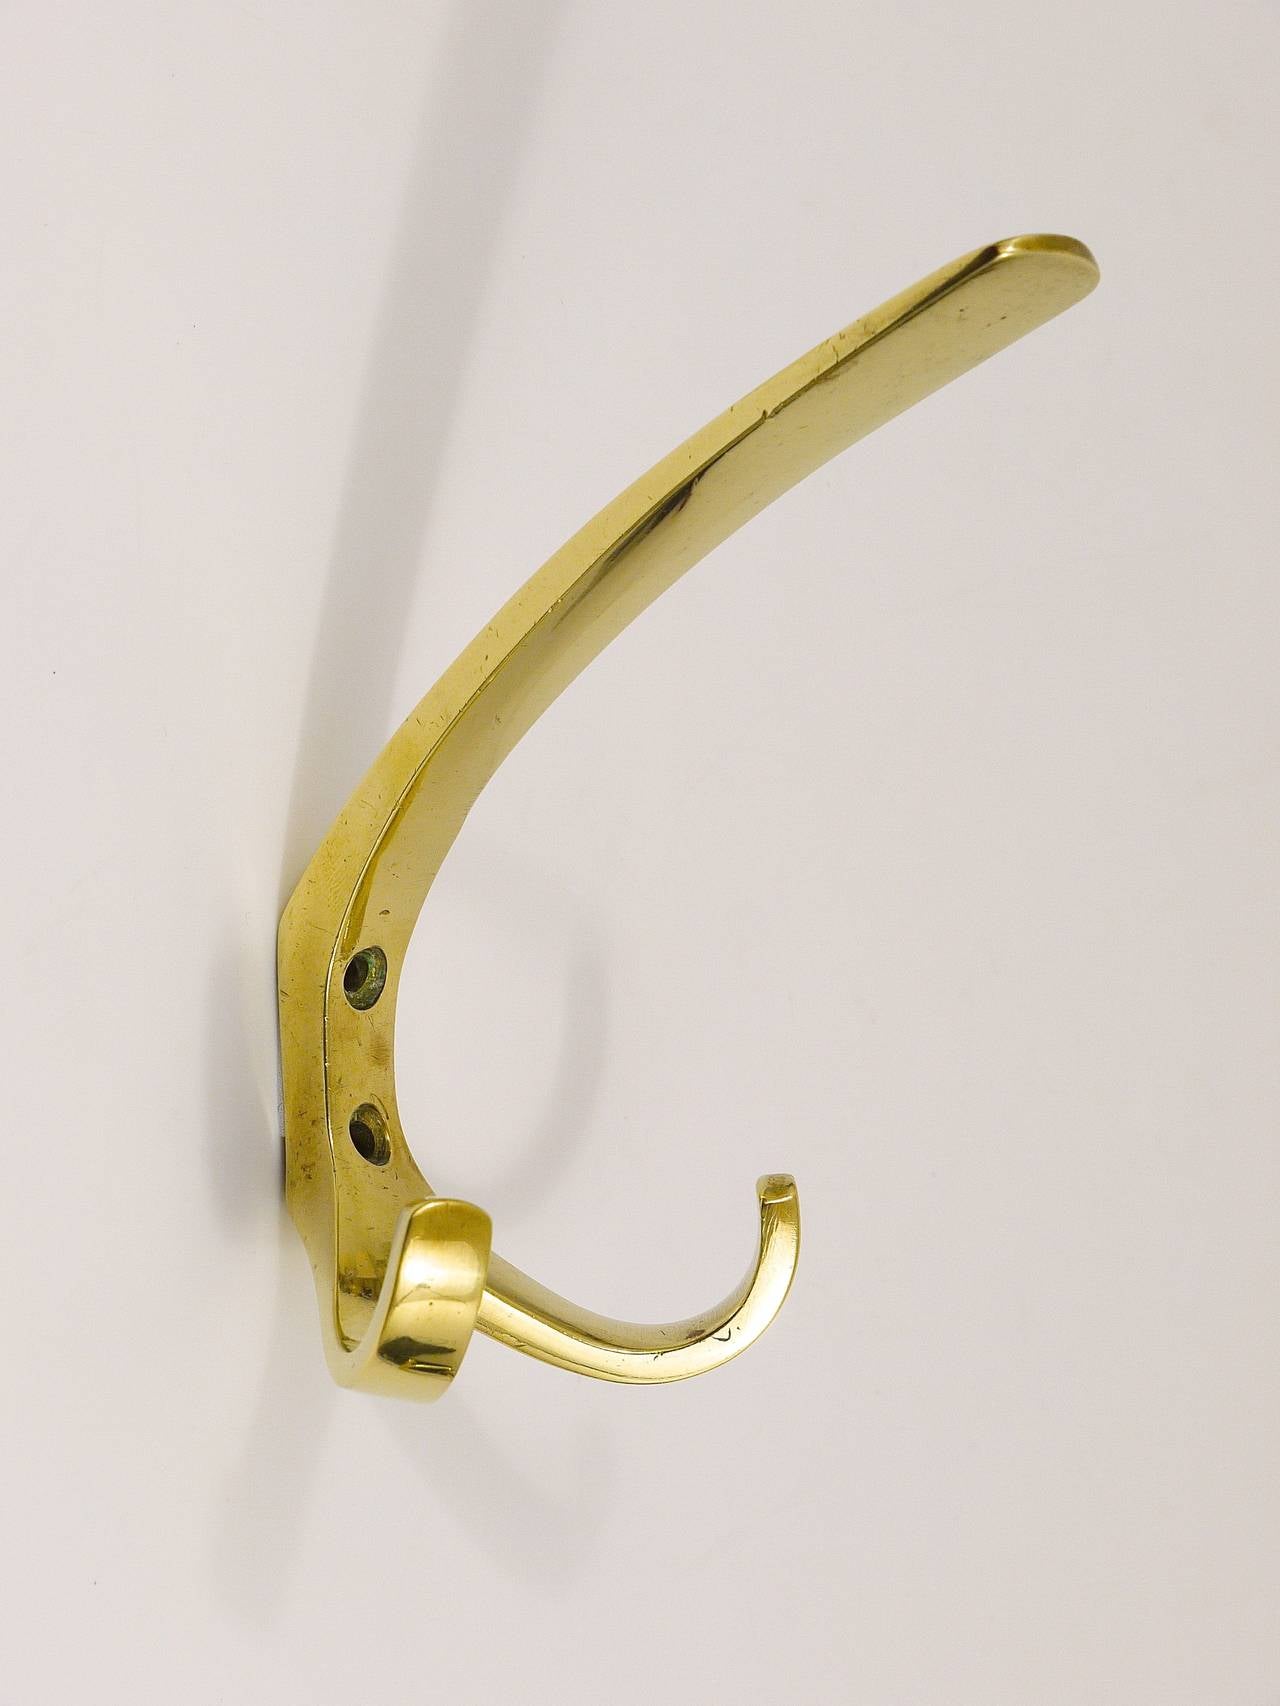 One (1) Austrian brass wall hook, executed in the 1950s by Baller, Austria. In good condition with nice patina. 